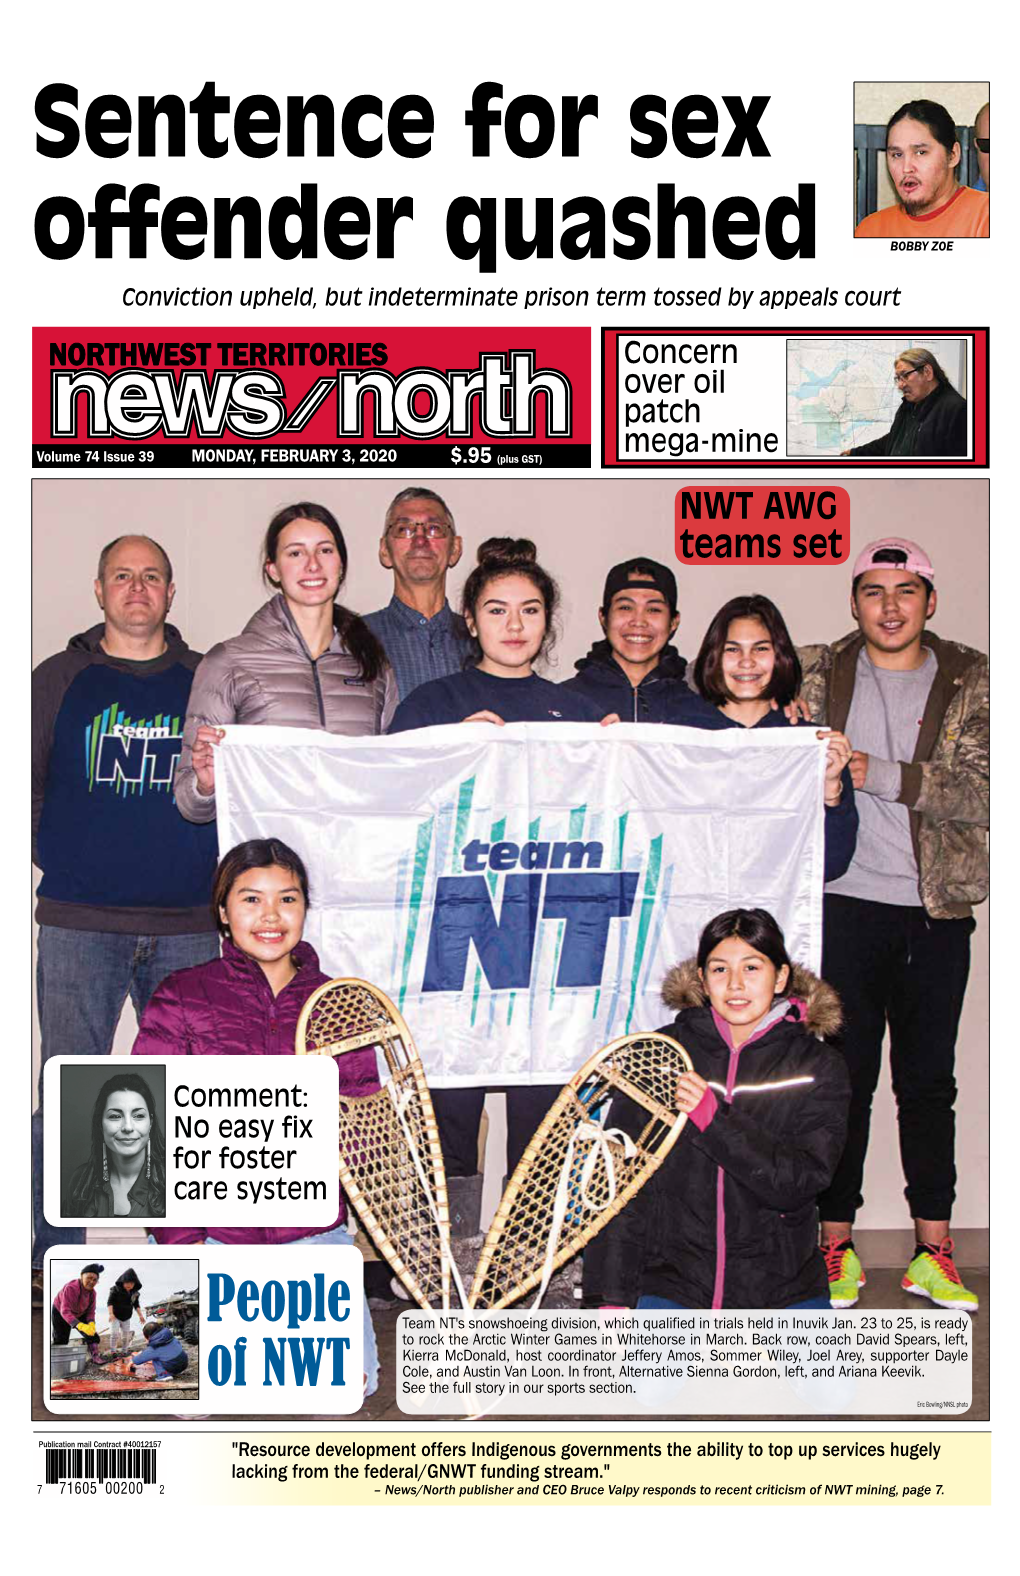 People of NWT NEWS/NORTH Nwt, Monday, February 3, 2020 3 Did We Get It Wrong? News/North Is Committed to Getting Facts and Names Right